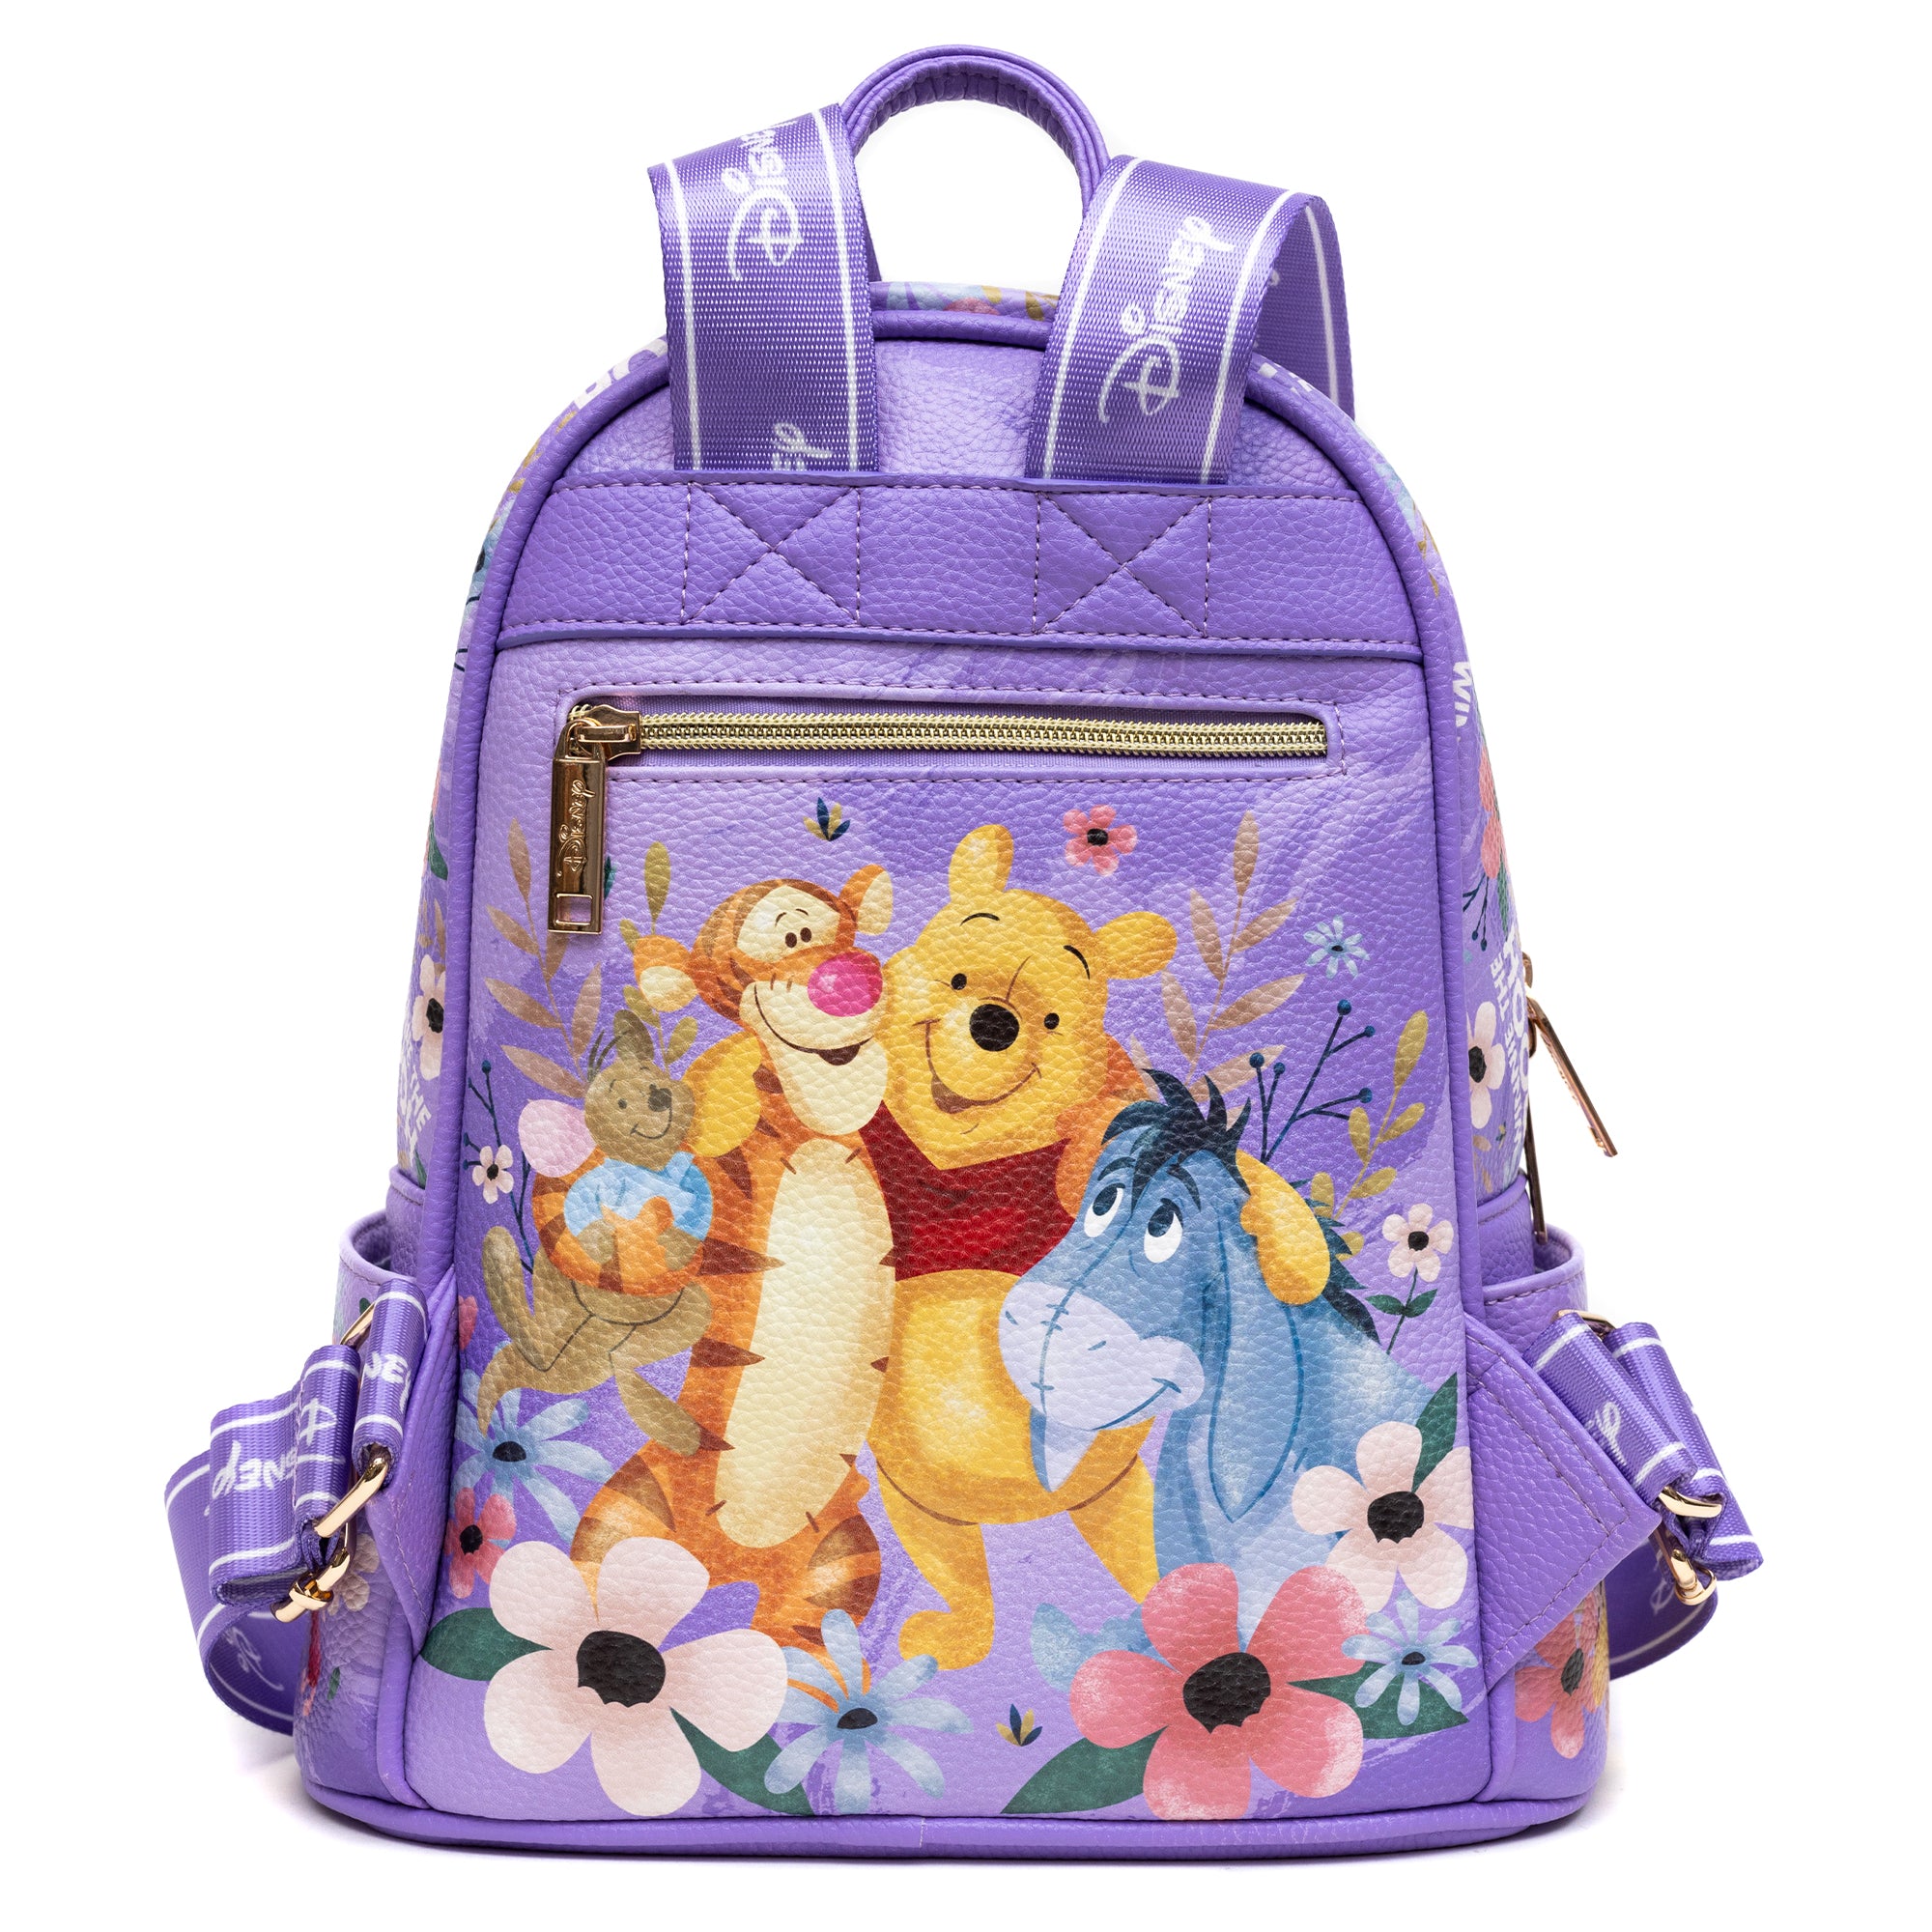 WondaPOP LUXE - Disney Winnie the Pooh Mini Backpack - Limited Edition - NEW RELEASE